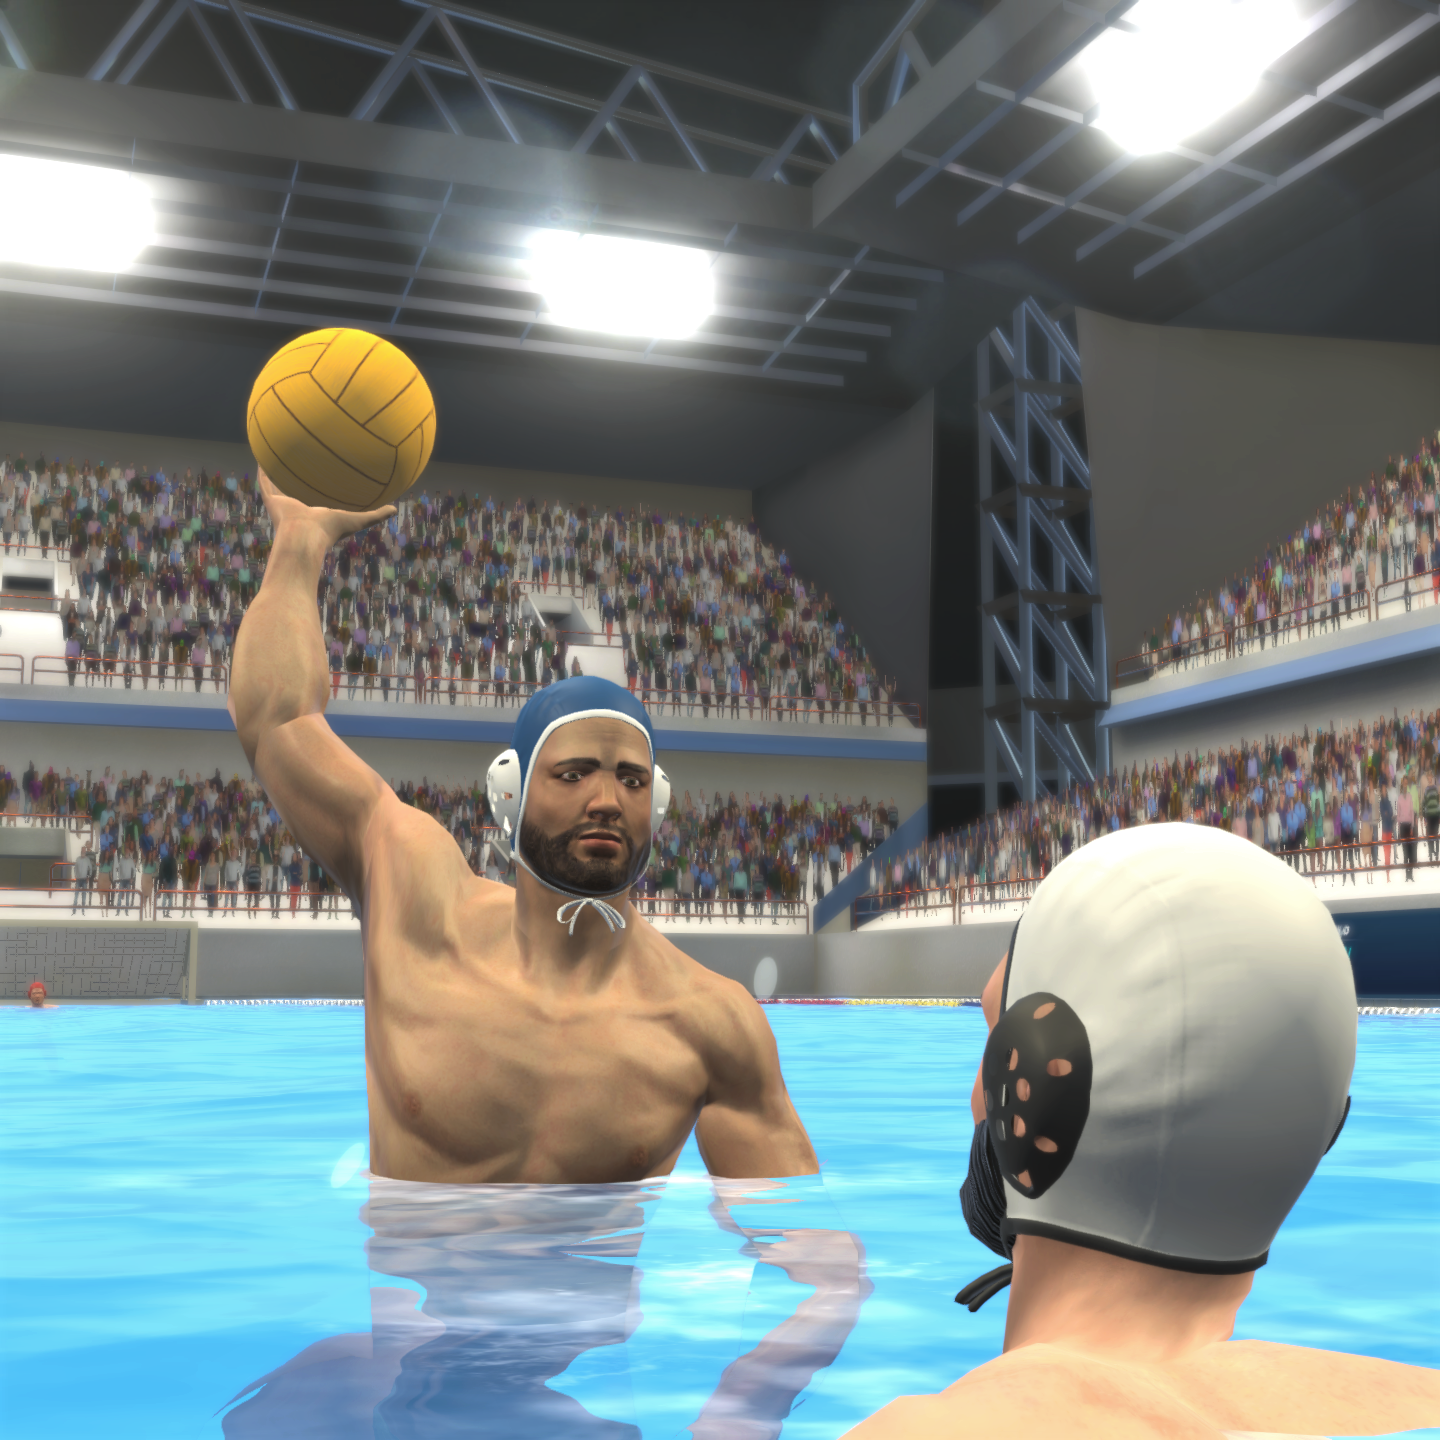 Interview with creator of Water Polo Revolution